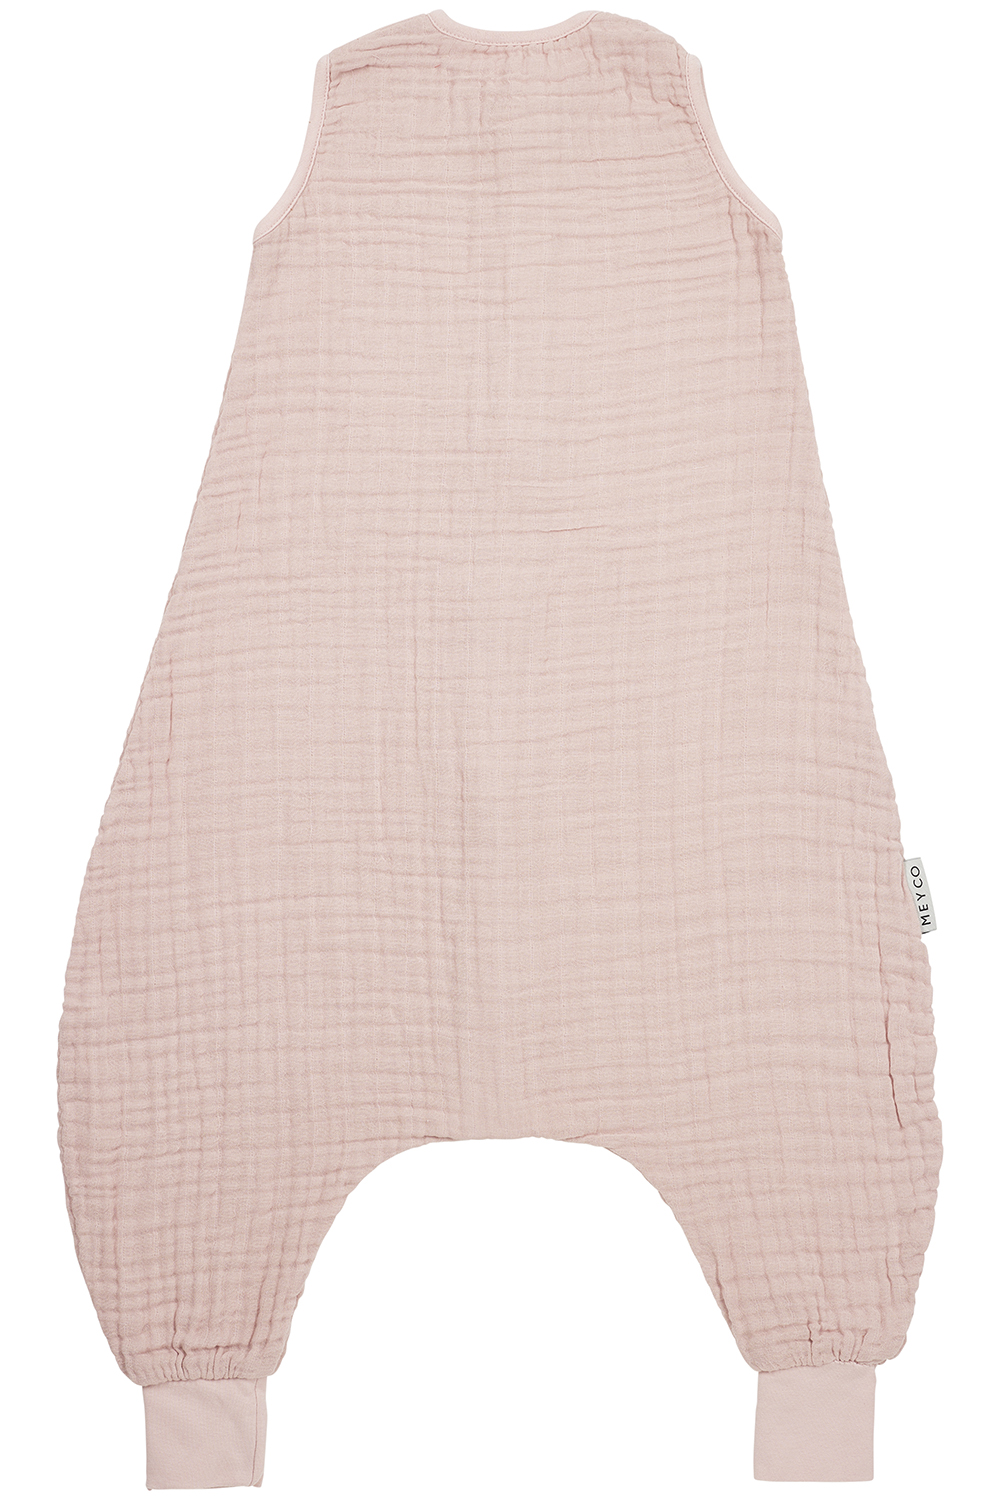 Baby summer sleep overall jumper pre-washed muslin Uni - soft pink - 80cm